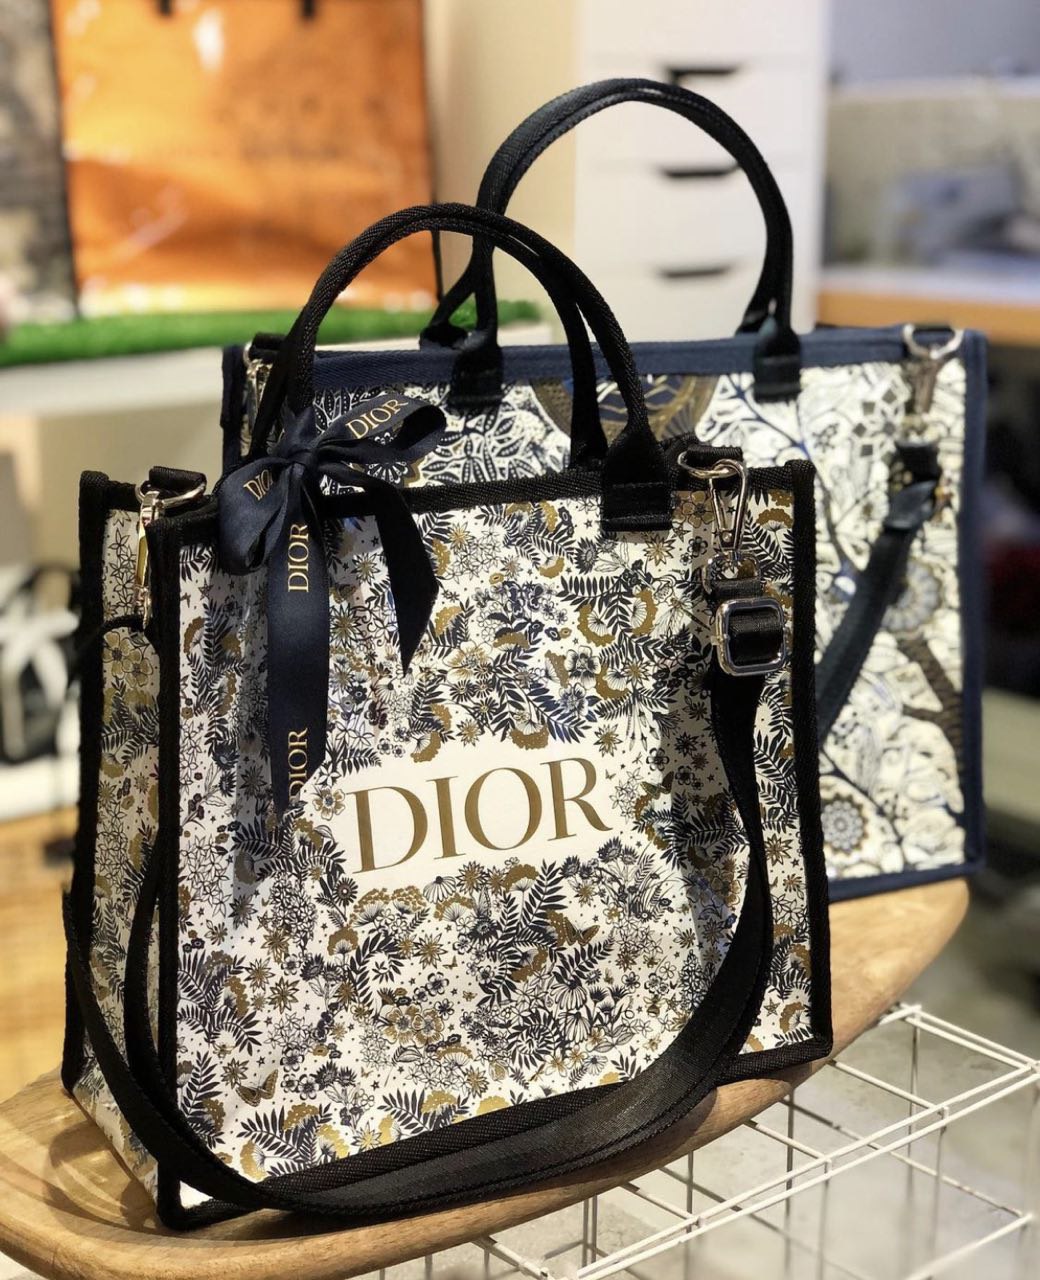 Dior  Bags  Brand New Dior Special Limited Edition Paper Bag  Poshmark